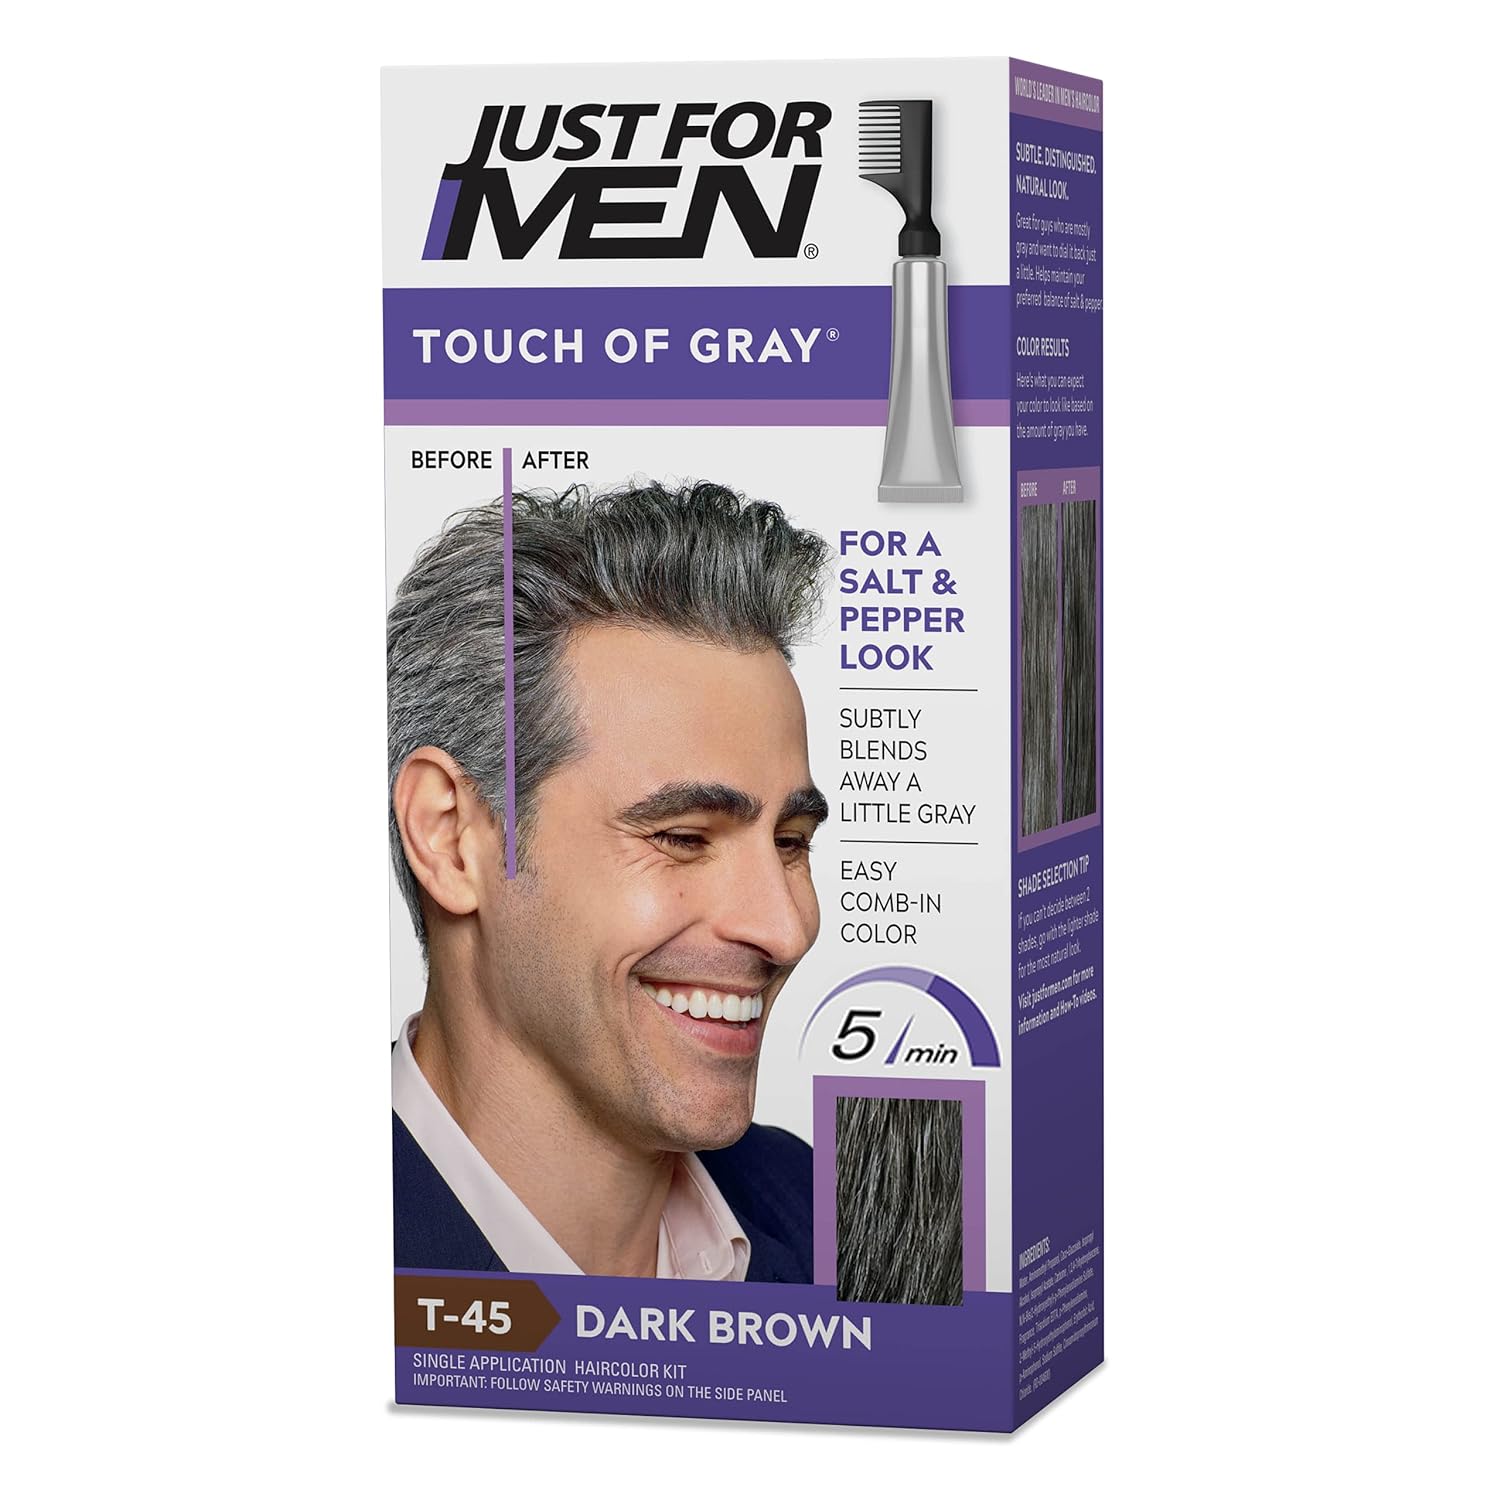 Just For Men Dark Brown Hair Color Touch of Gray, T-45 Dark Brown Hair Color for men with Comb Applicator